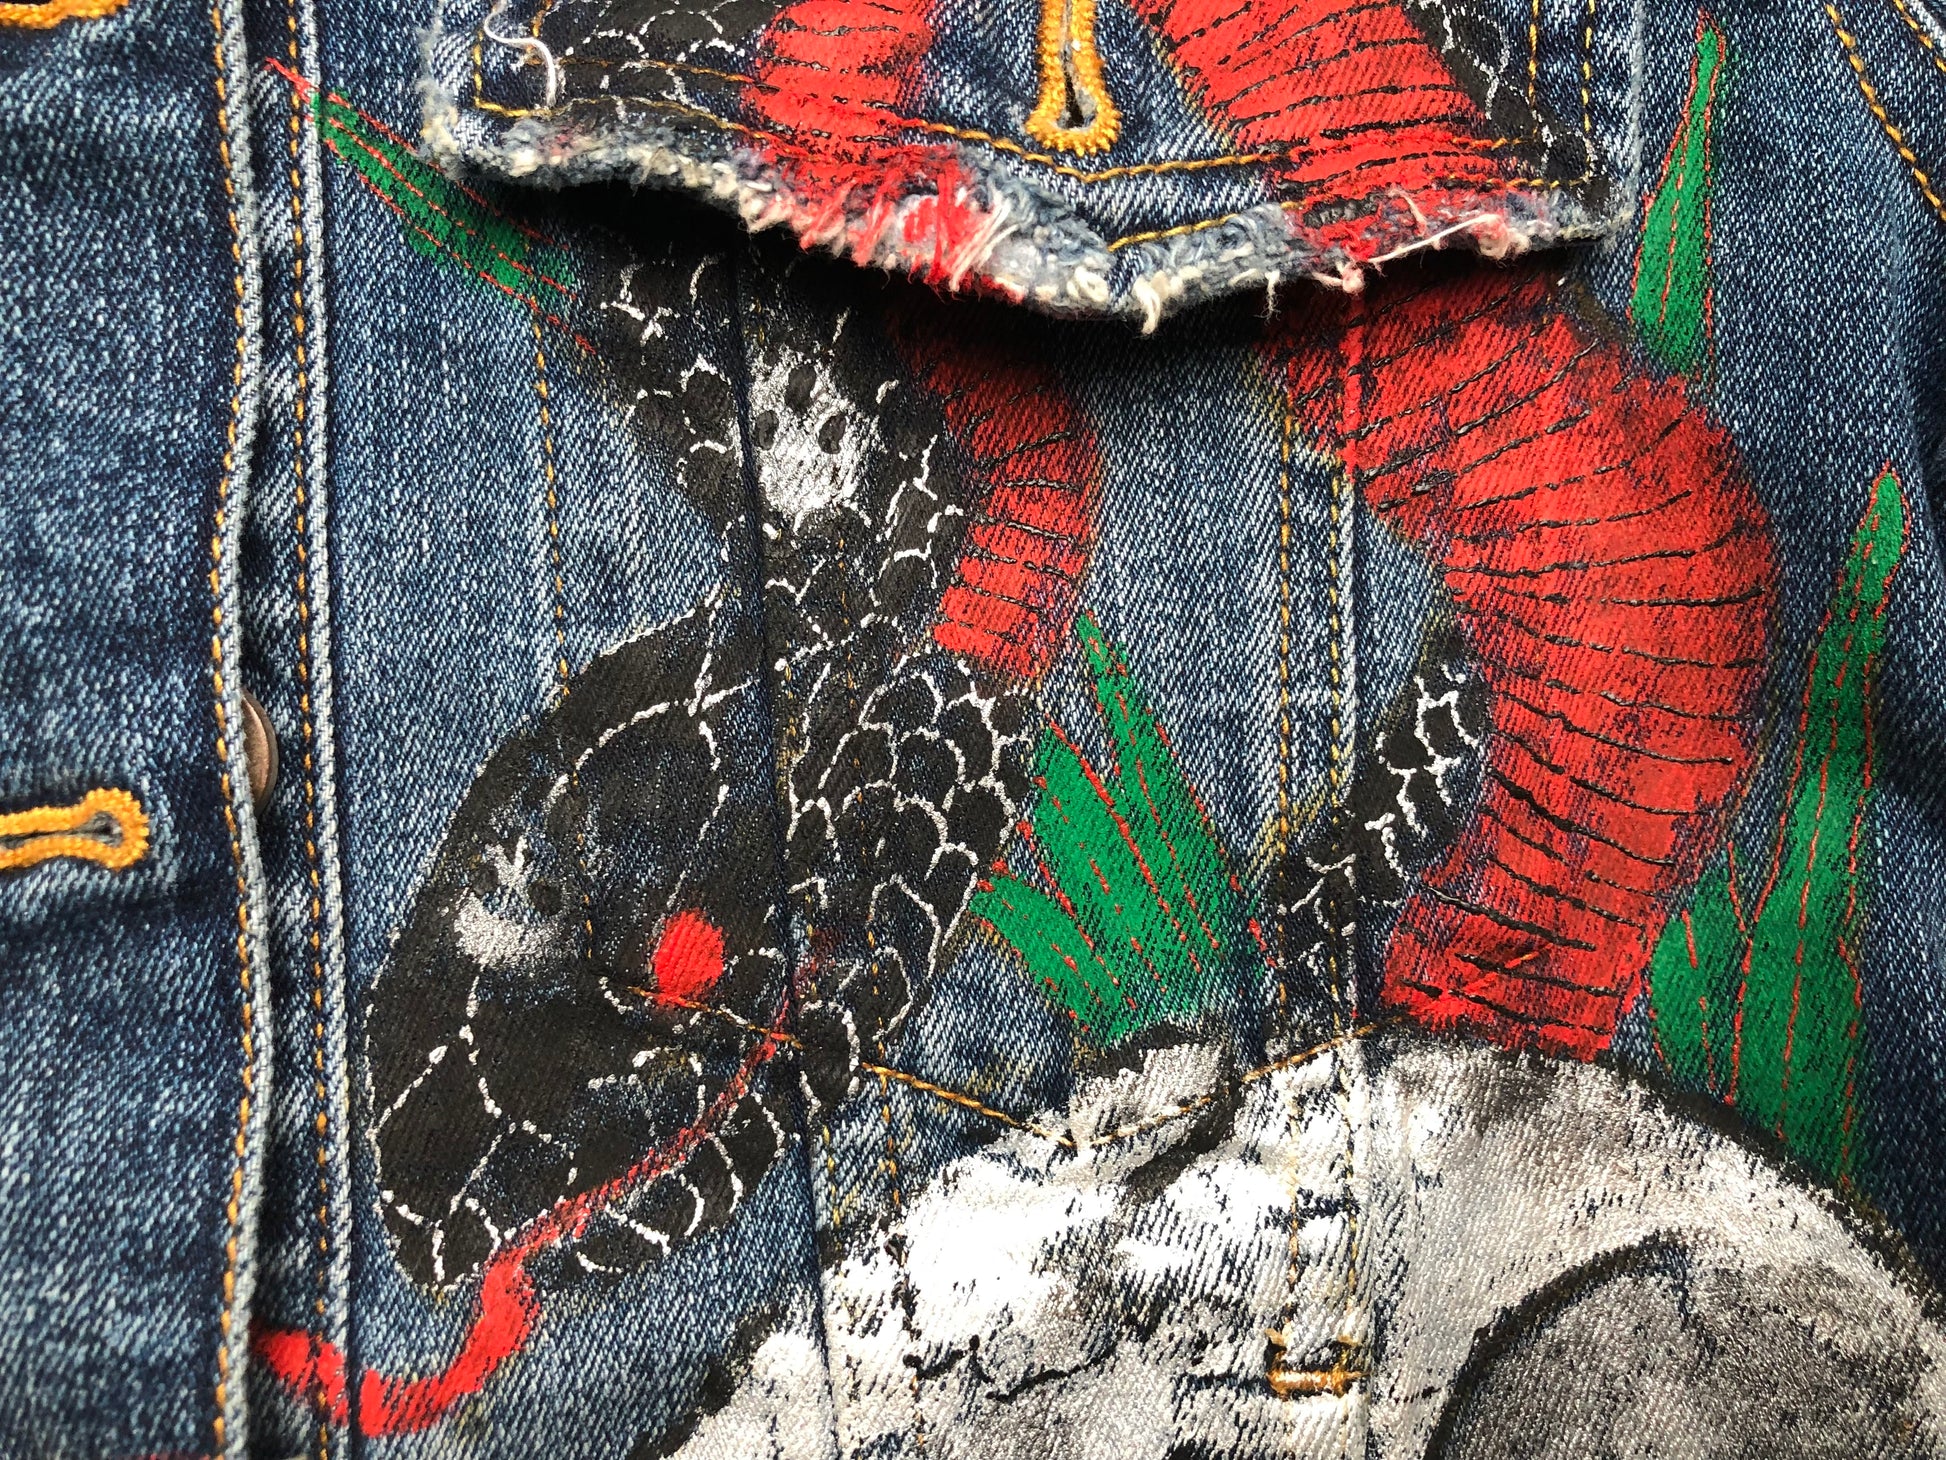 Very detailed painting of a snake on a women's denim jacket